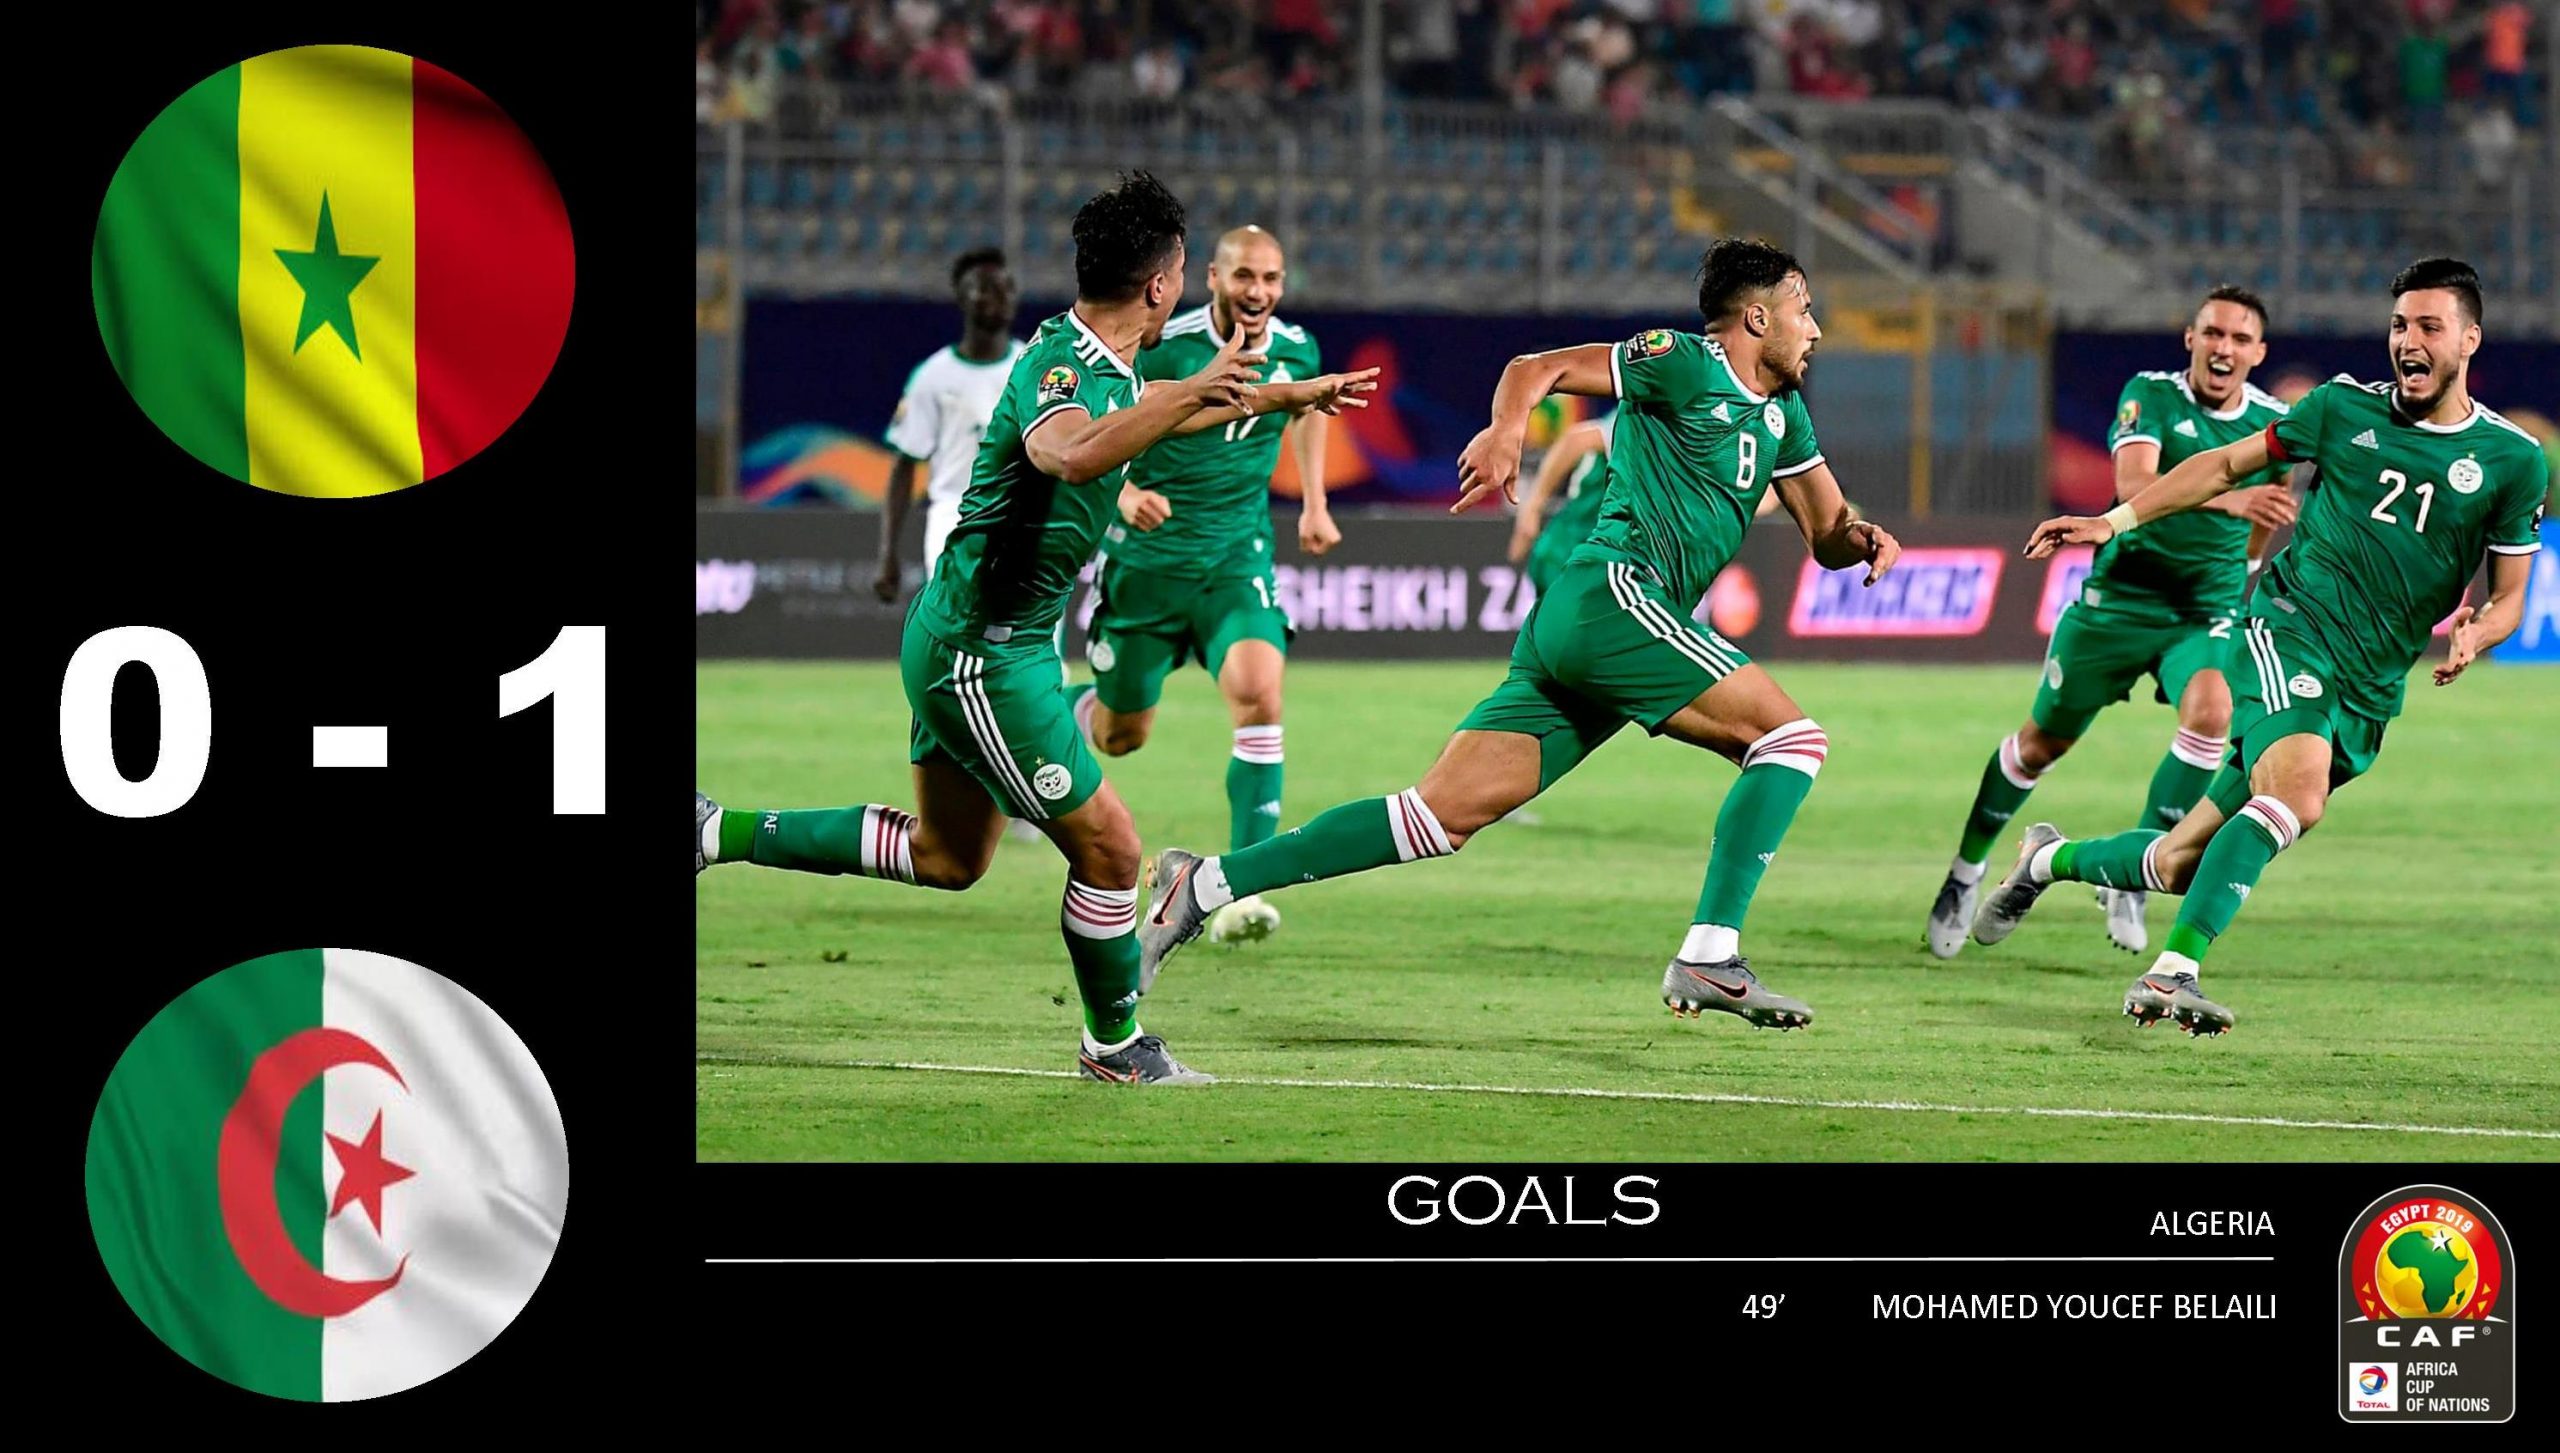 Algeria Through To Last 16 After 1-0 Win Against Senegal | Africa Cup Of Nations